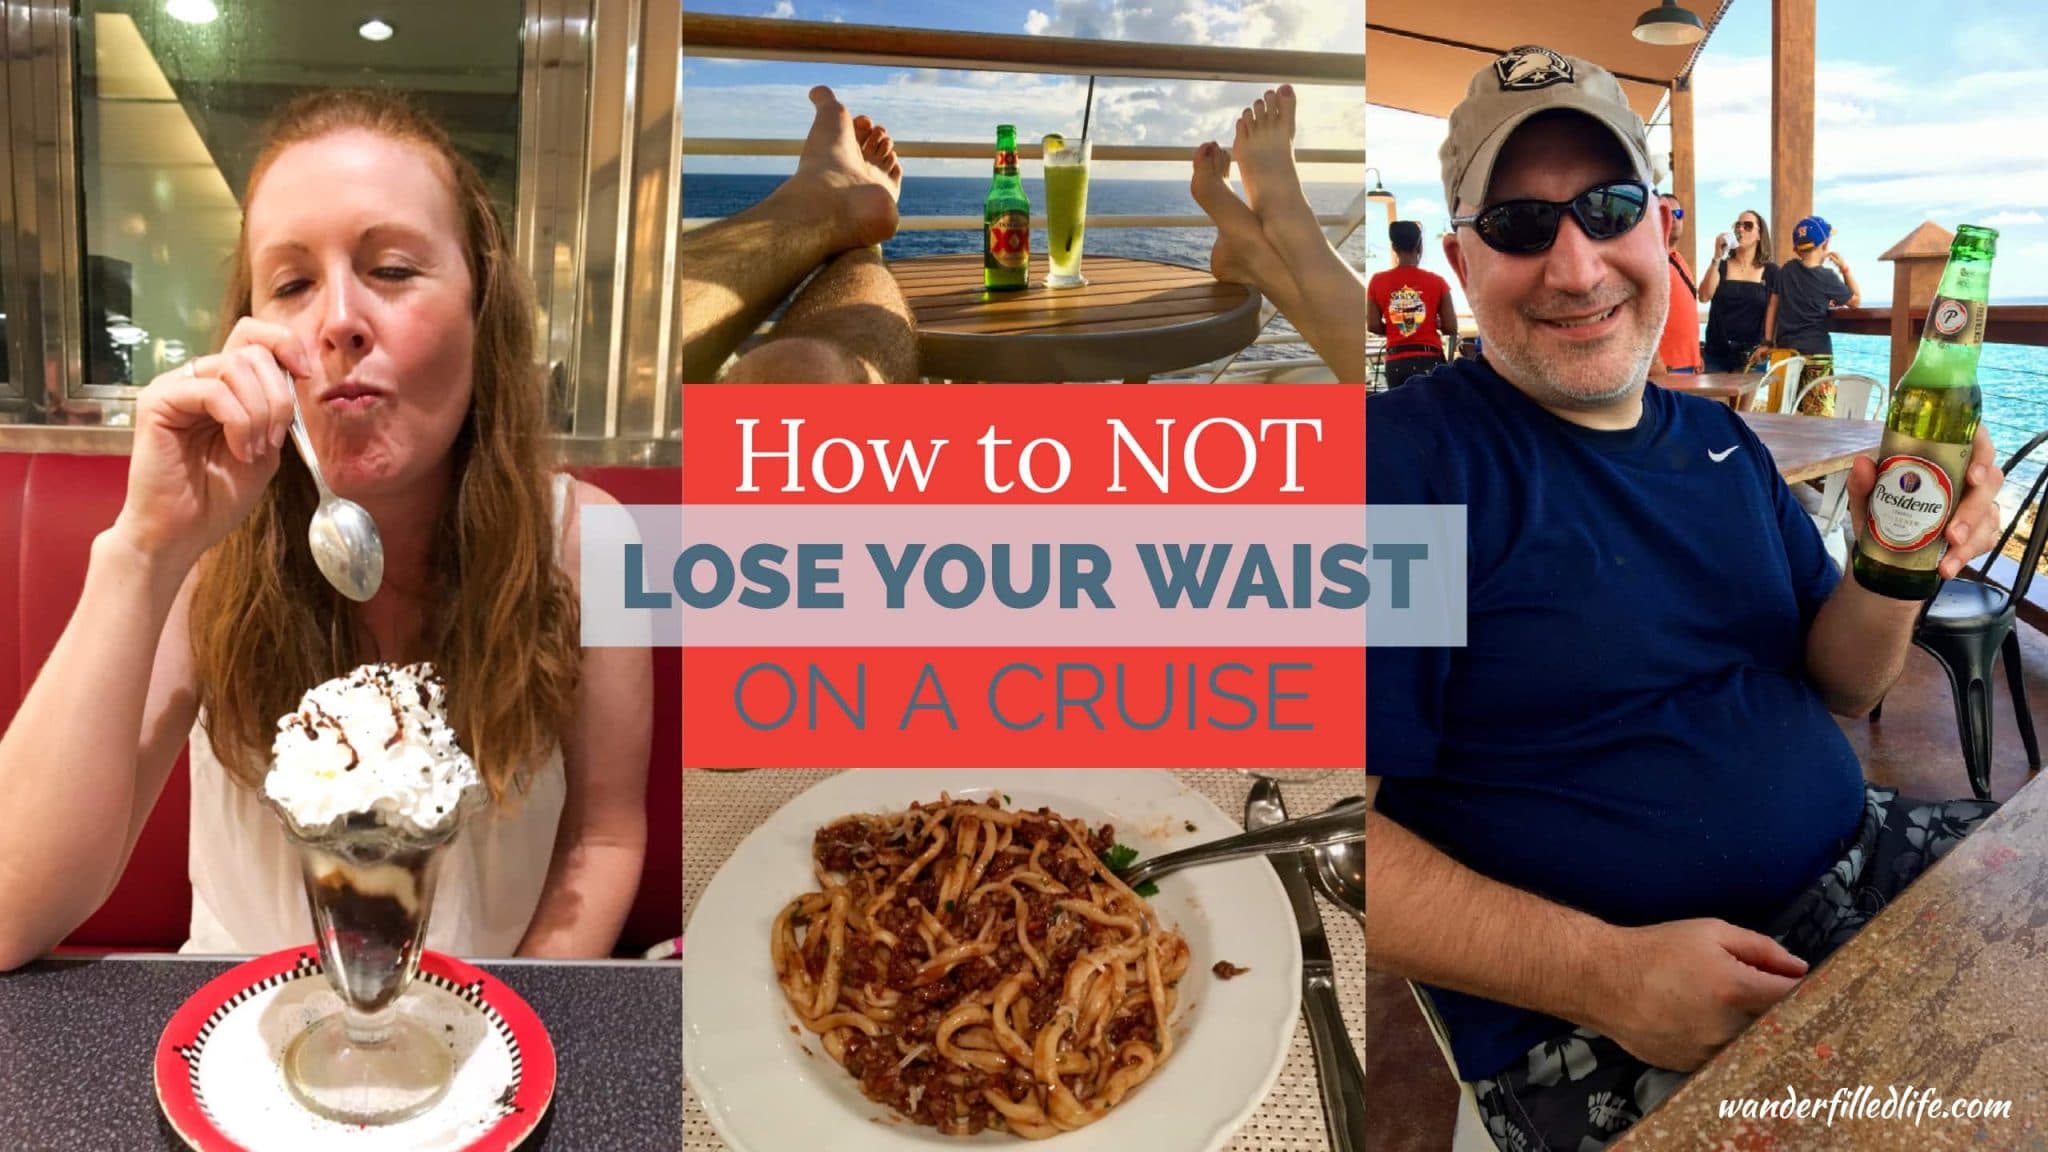 How to NOT Lose Your Waist on a Cruise